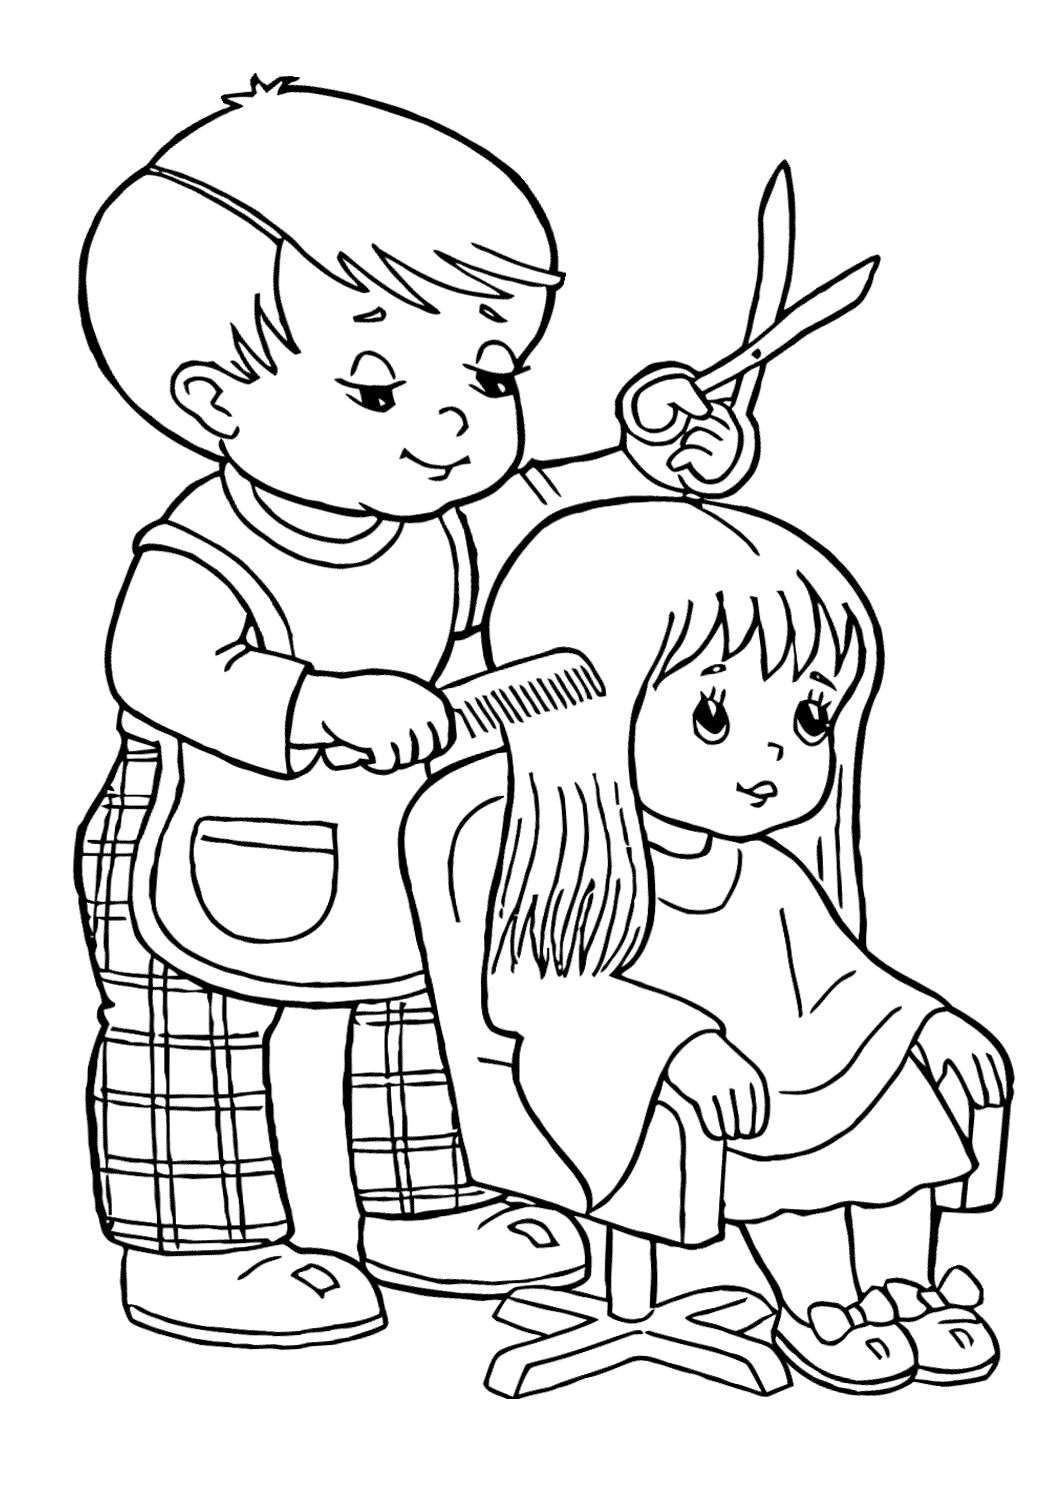 Young Barber Coloring Page Coloring Page